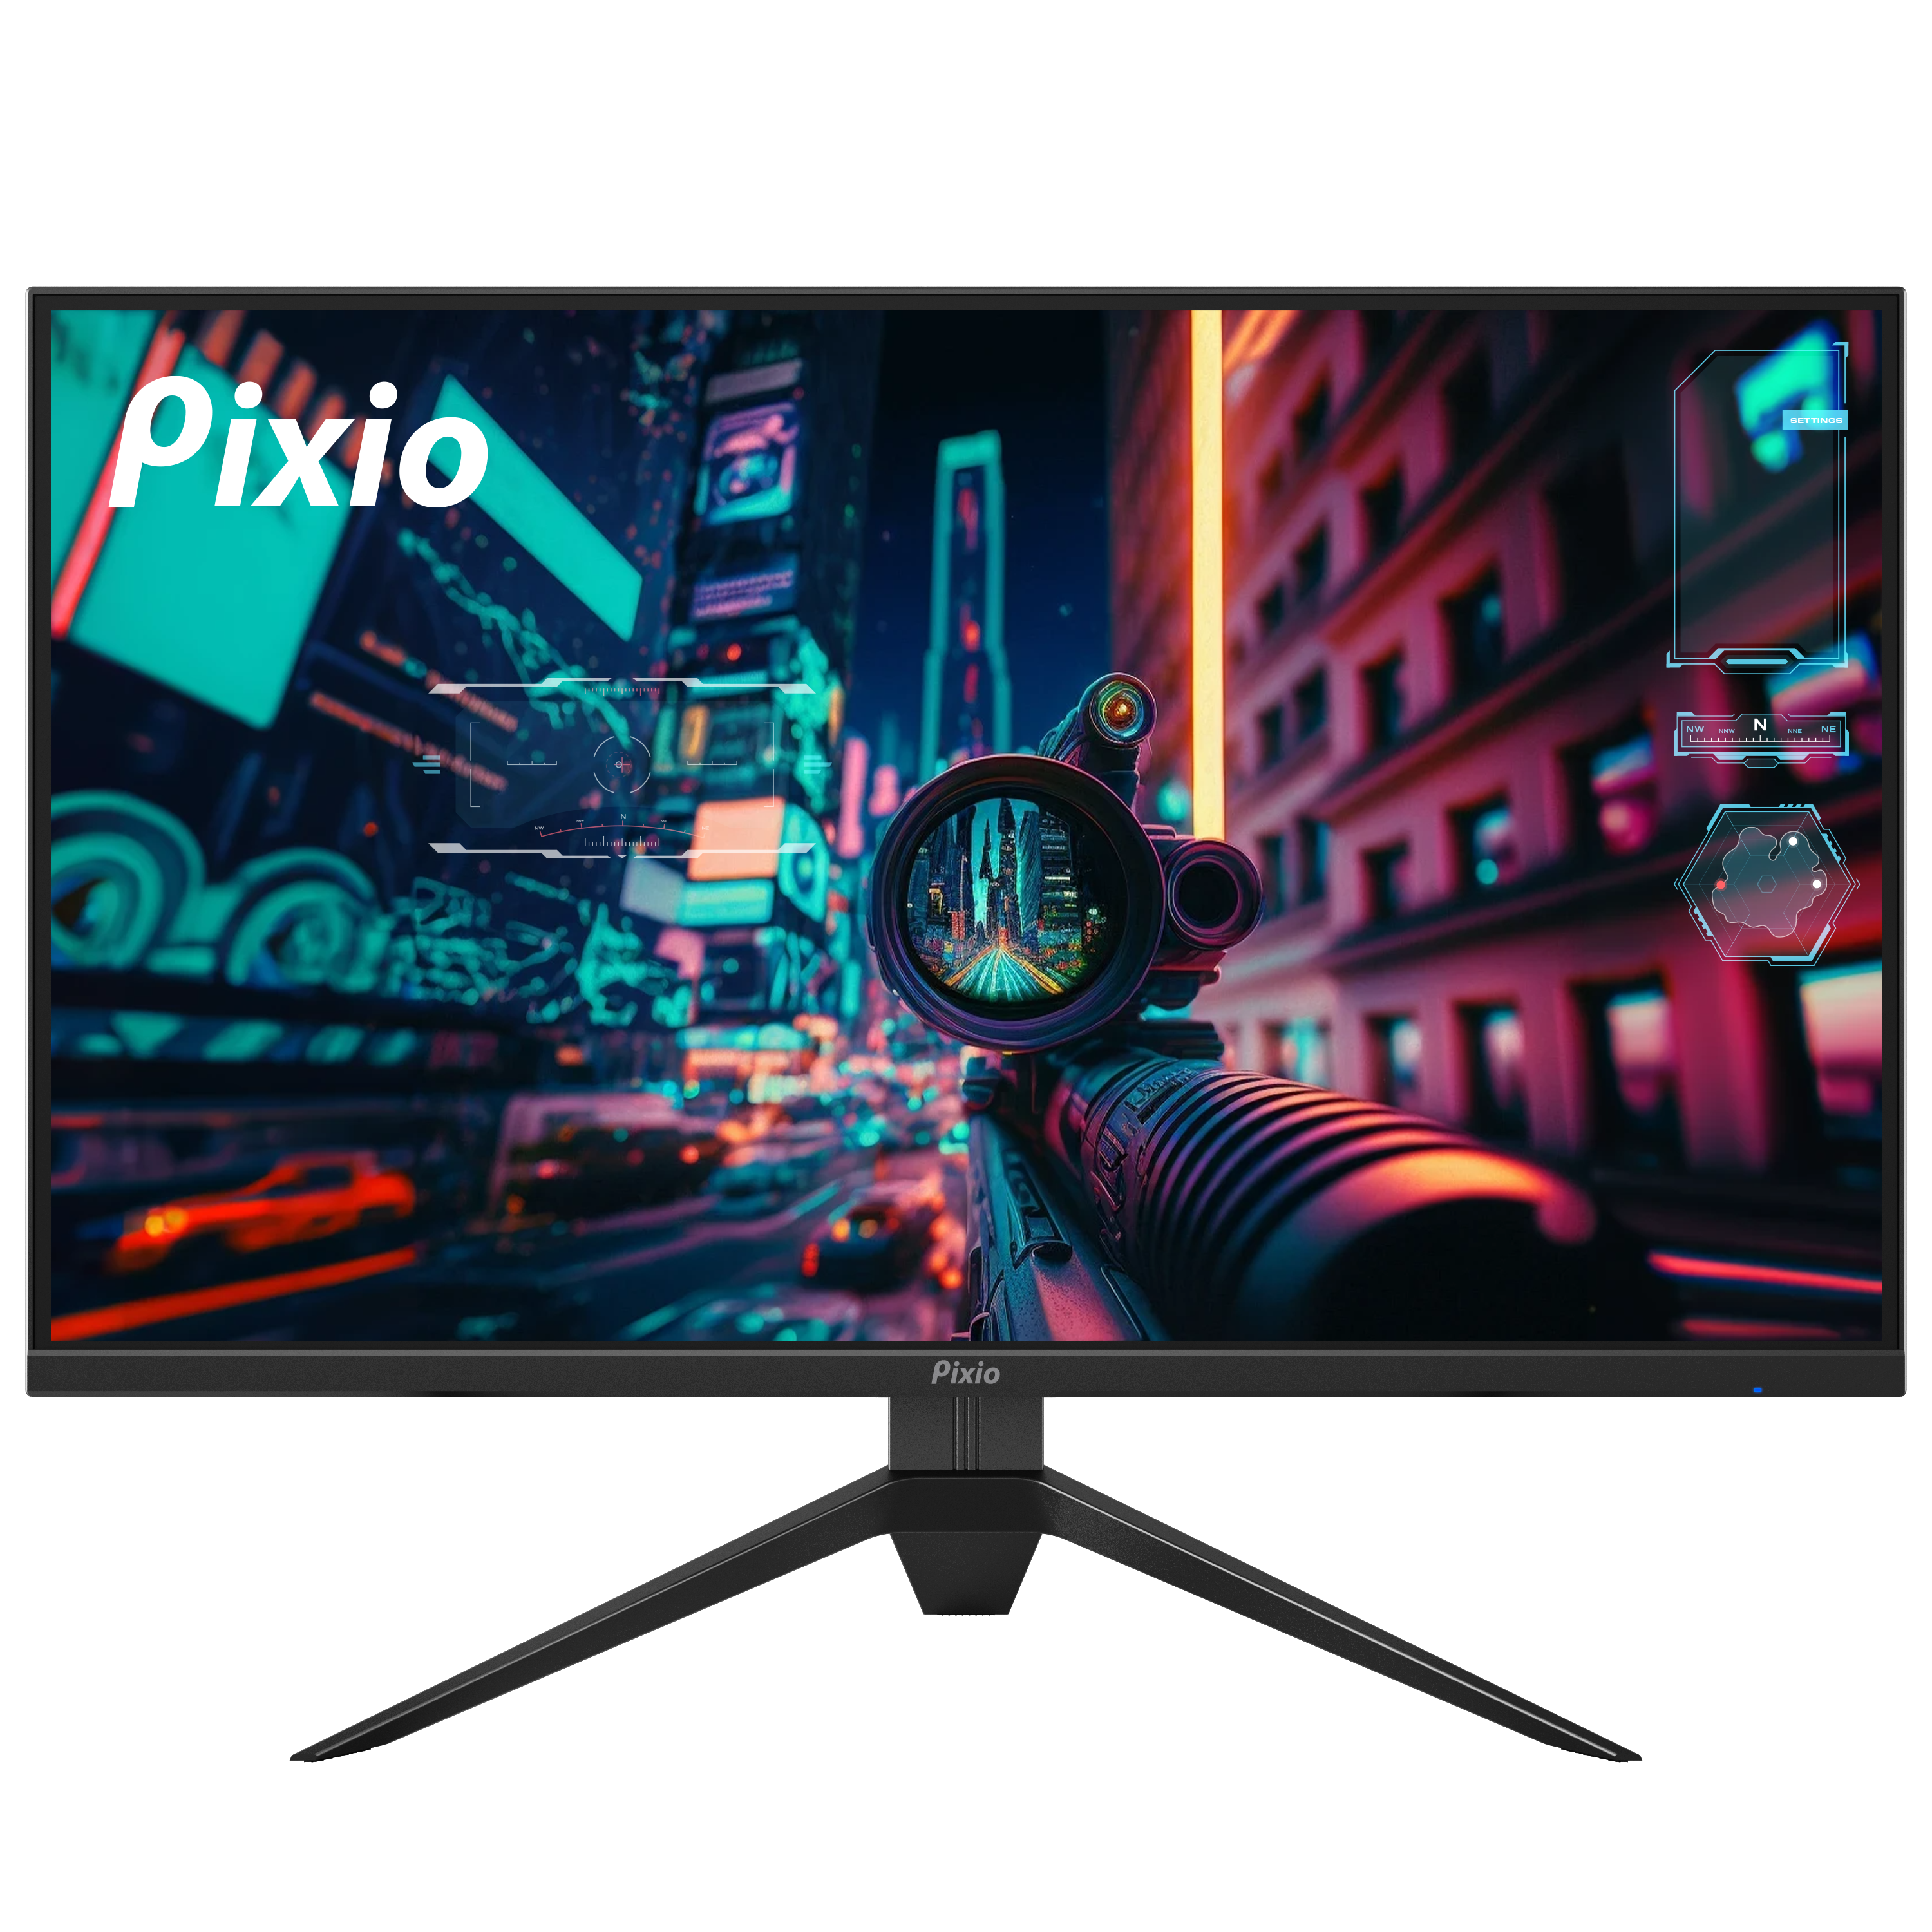 PX277 Prime Gaming Monitor